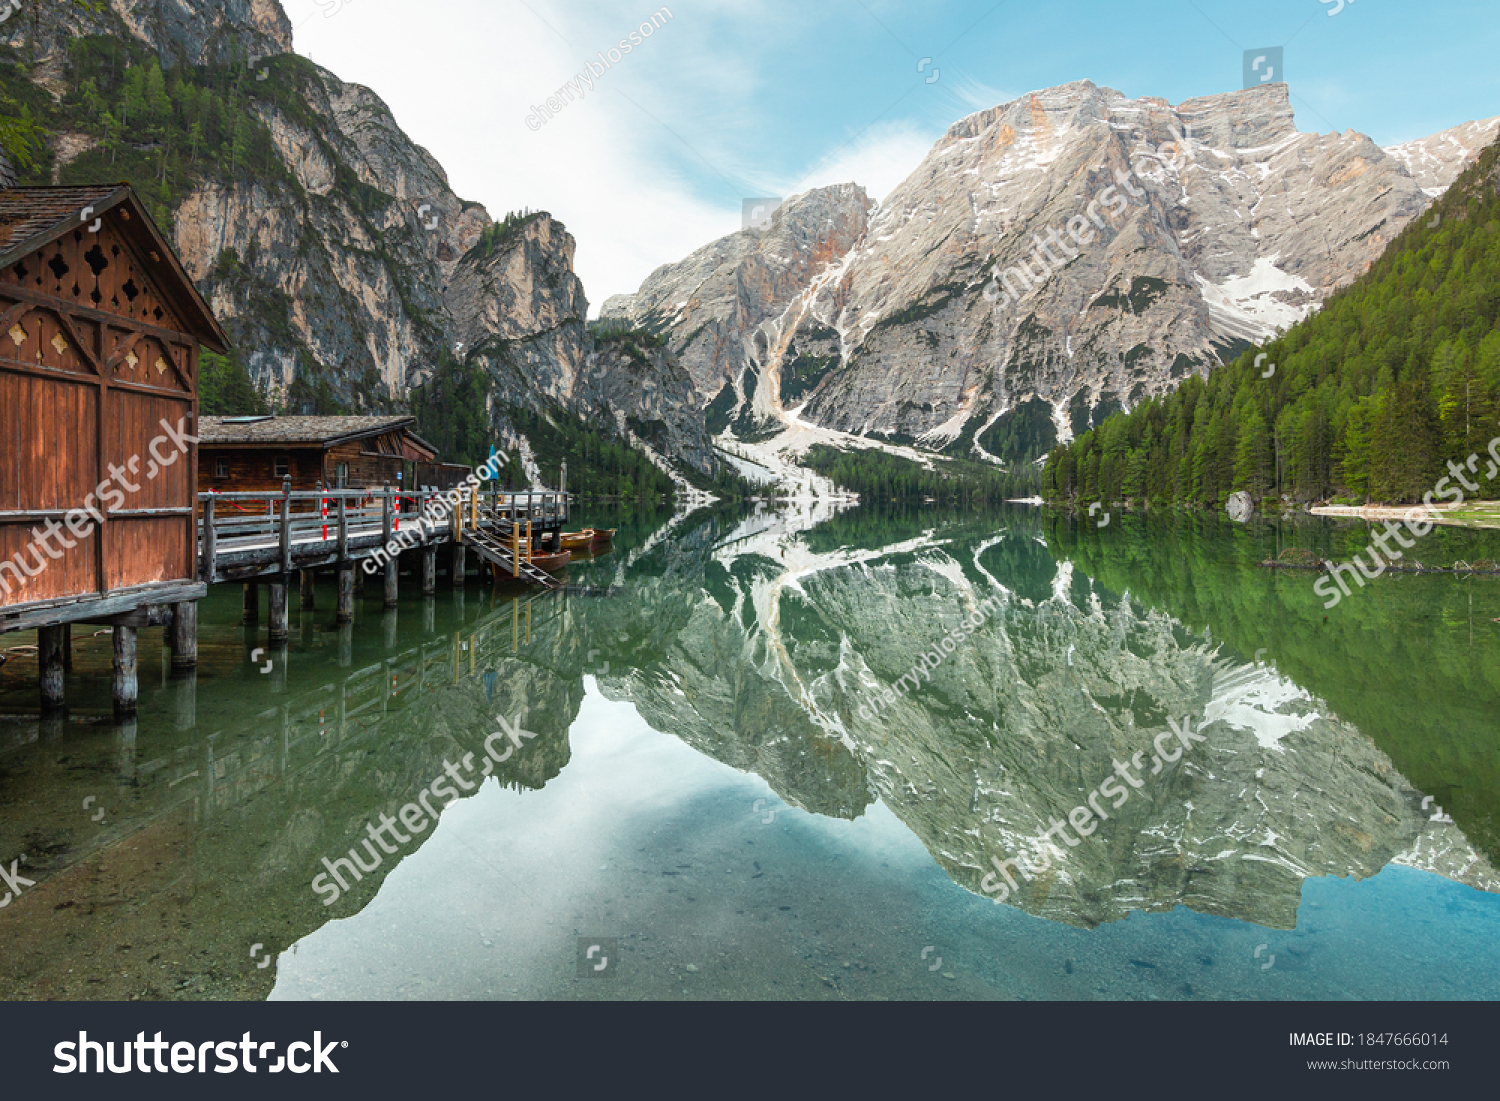 panoramic view of Mount Seekofel and boatshouse mirroring in the clear calm water of iconic mountain lake Pragser Wildsee (Lago di Braies) in Dolomites, Unesco World Heritage, South Tyrol, Italy #1847666014